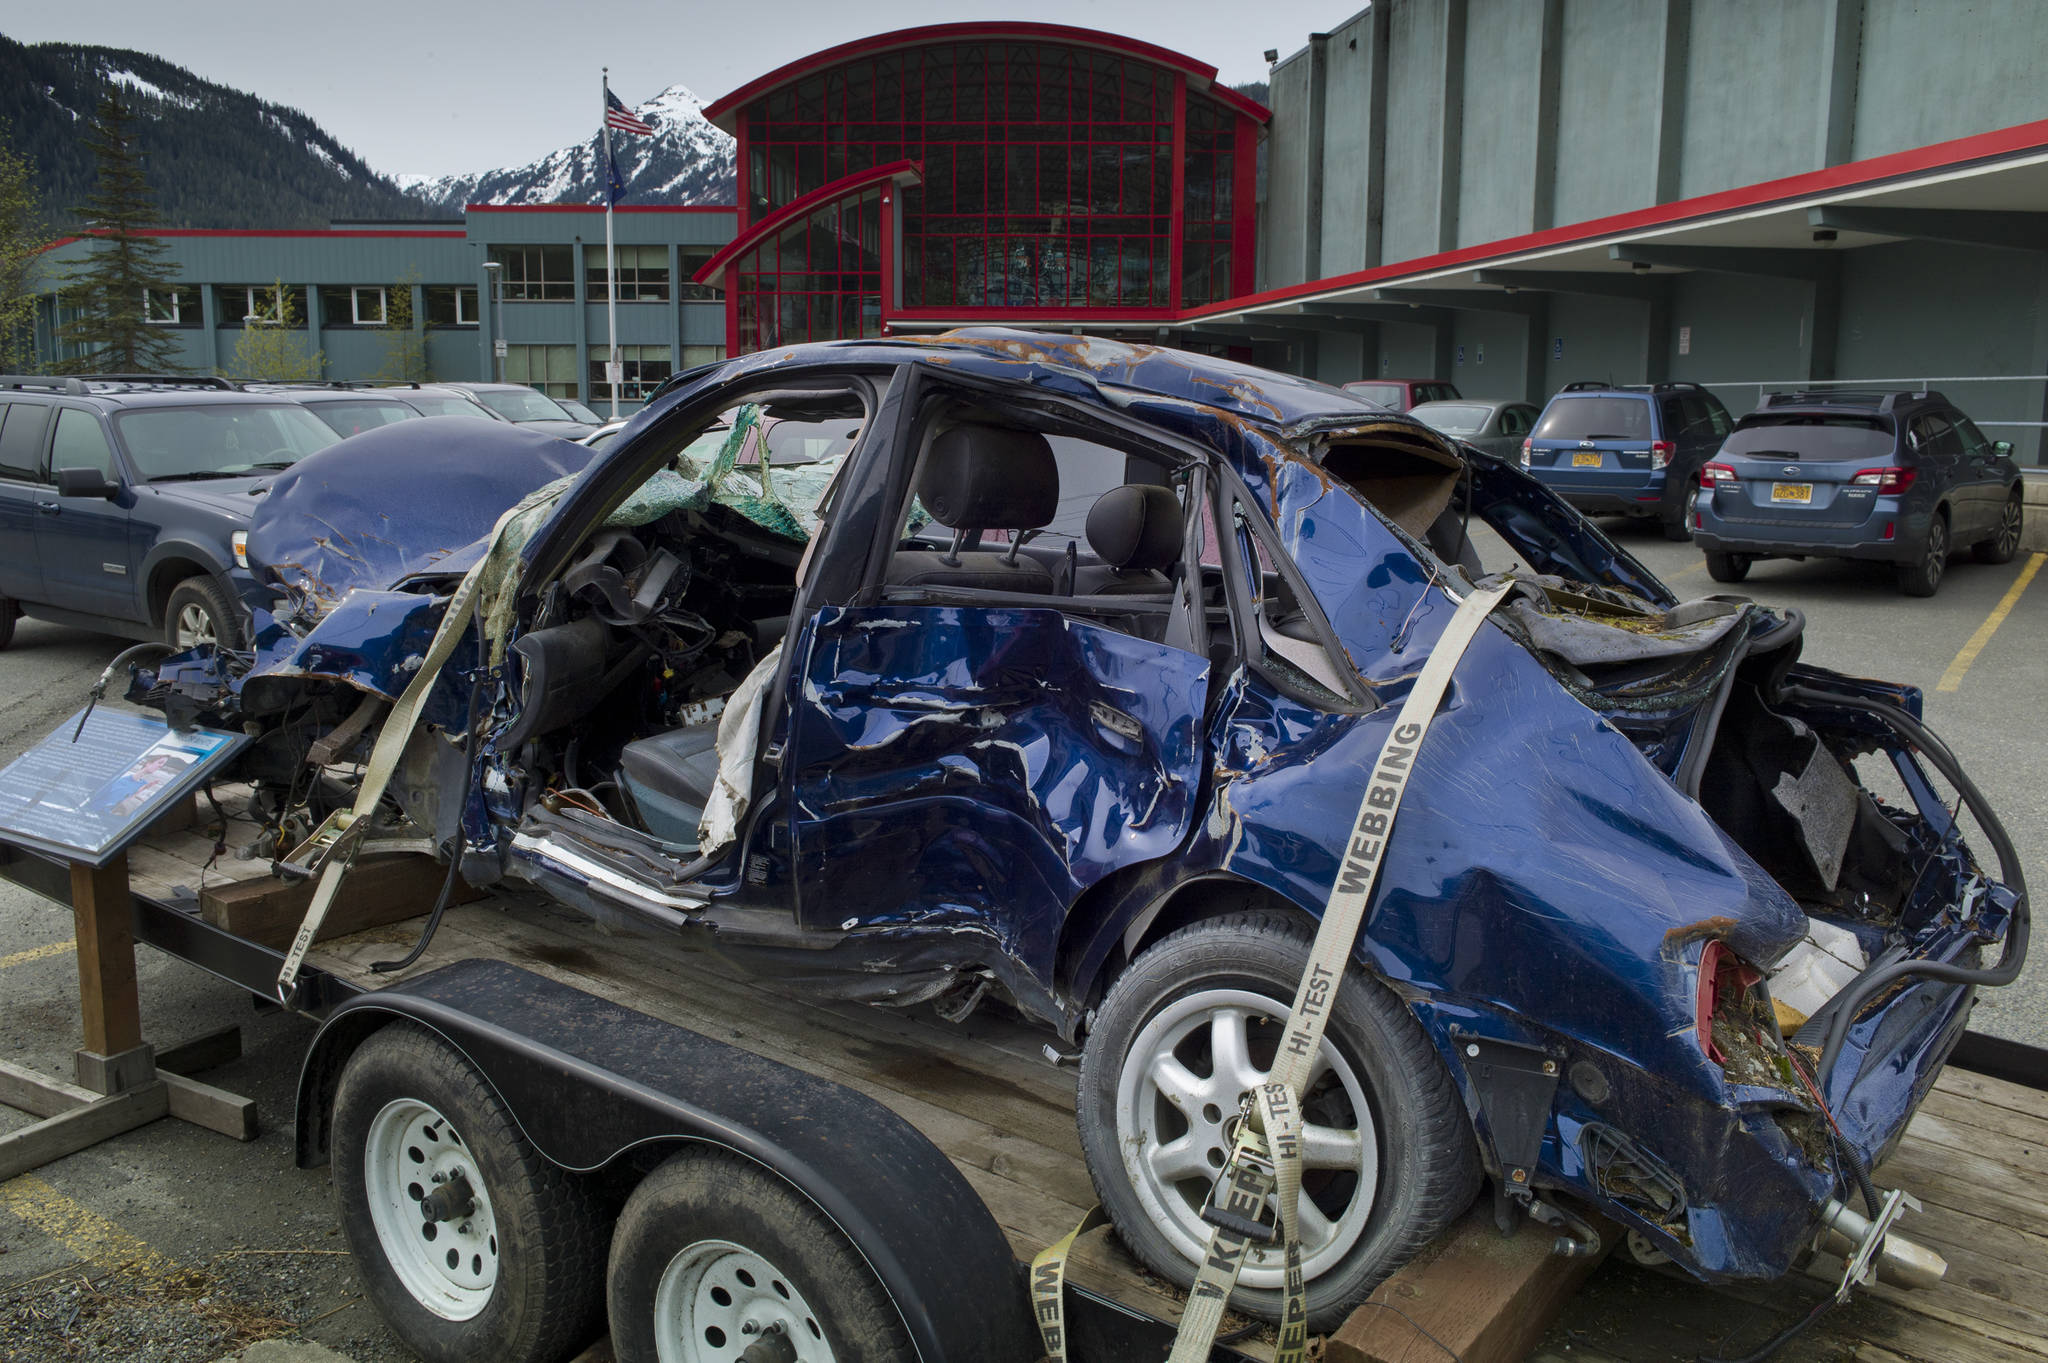 The destroyed vehicle in which Juneau-Douglas High School graduate Taylor White died in June 2009 is on display in front of the school as a reminder to current students of the perils of drinking and driving. (Michael Penn | Juneau Empire File)